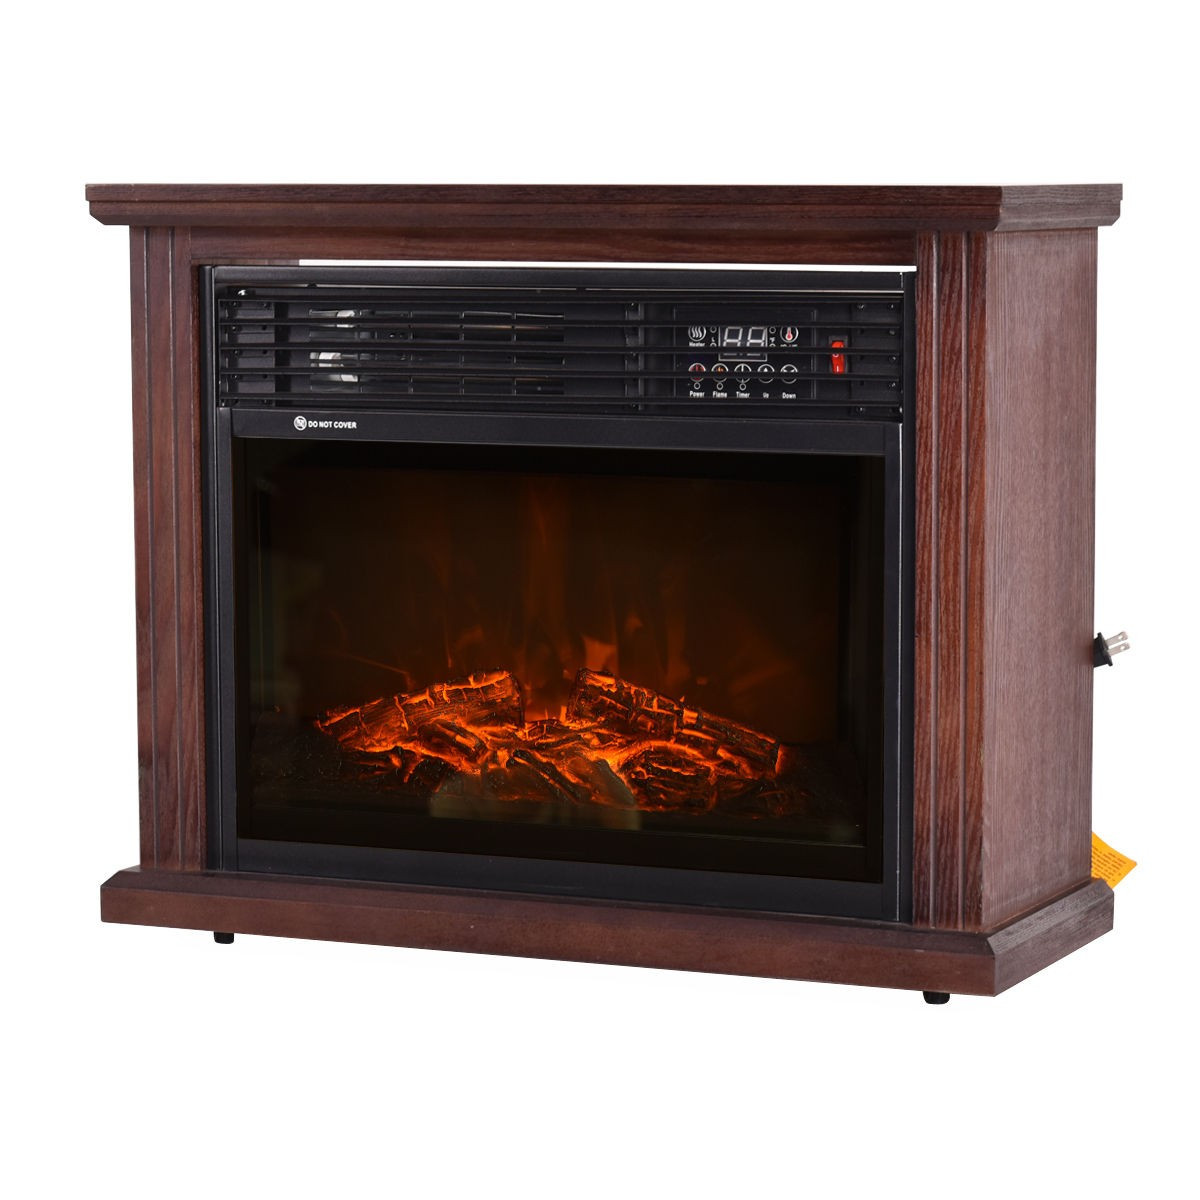 Free Standing Electric Fireplace
 28" Free Standing Electric Fireplace 1500W Glass View Log